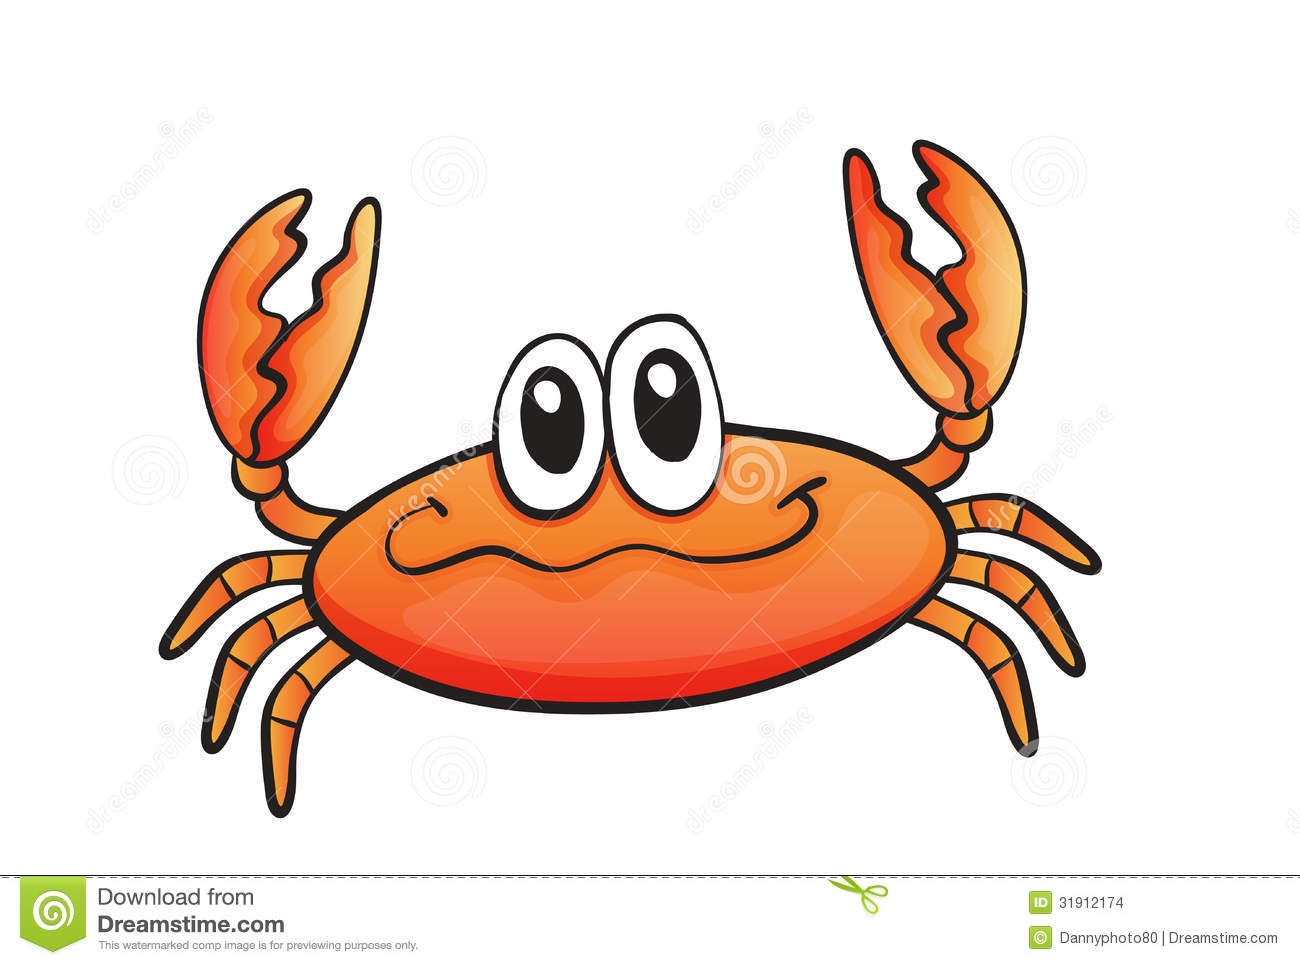 crab images image #34993